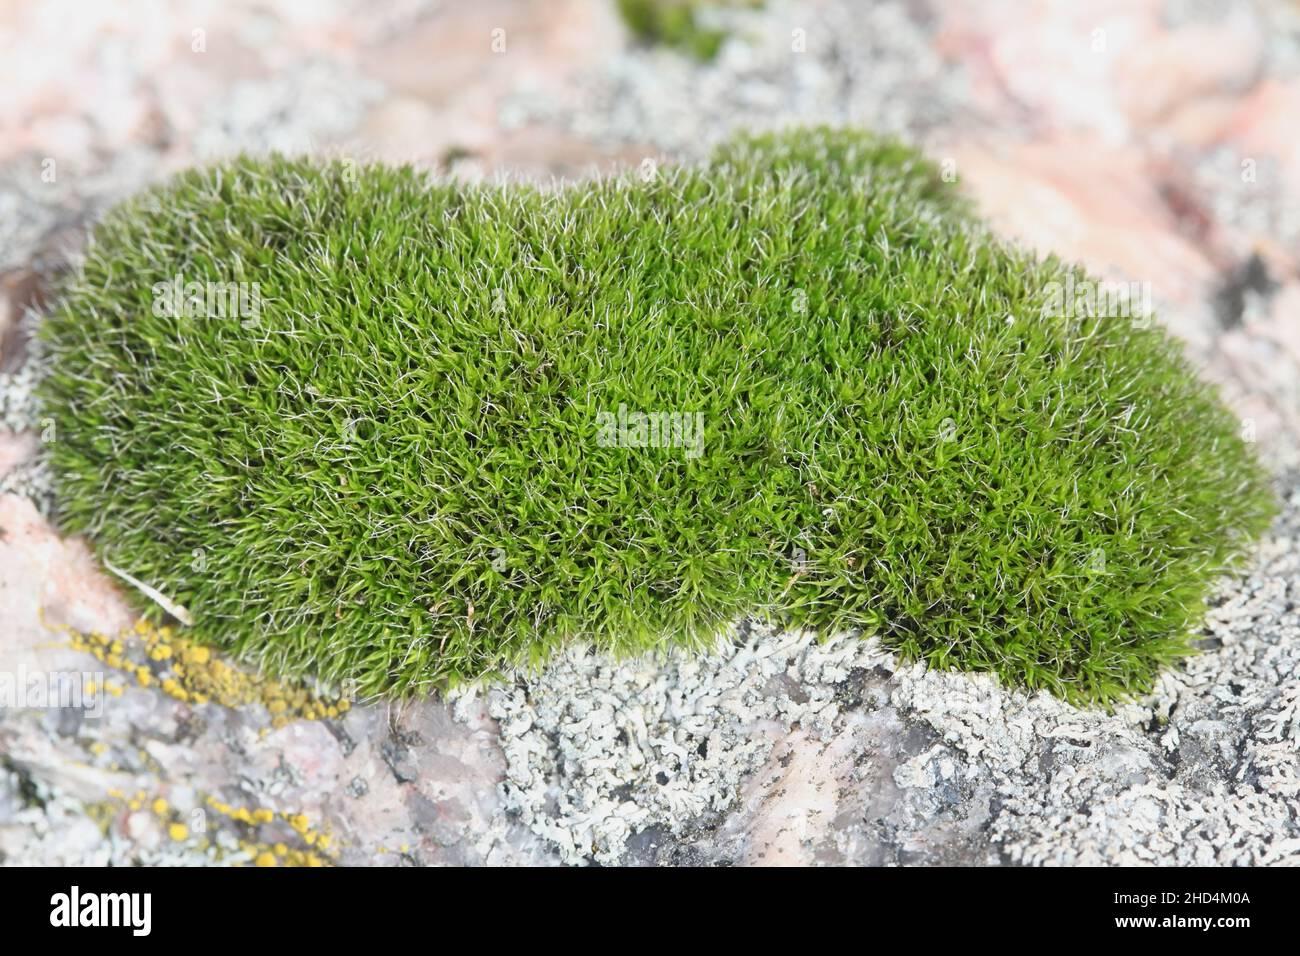 grimmia-muehlenbeckii-a-tufted-rock-moss-from-finland-with-no-common-english-name-2HD4M0A.jpg